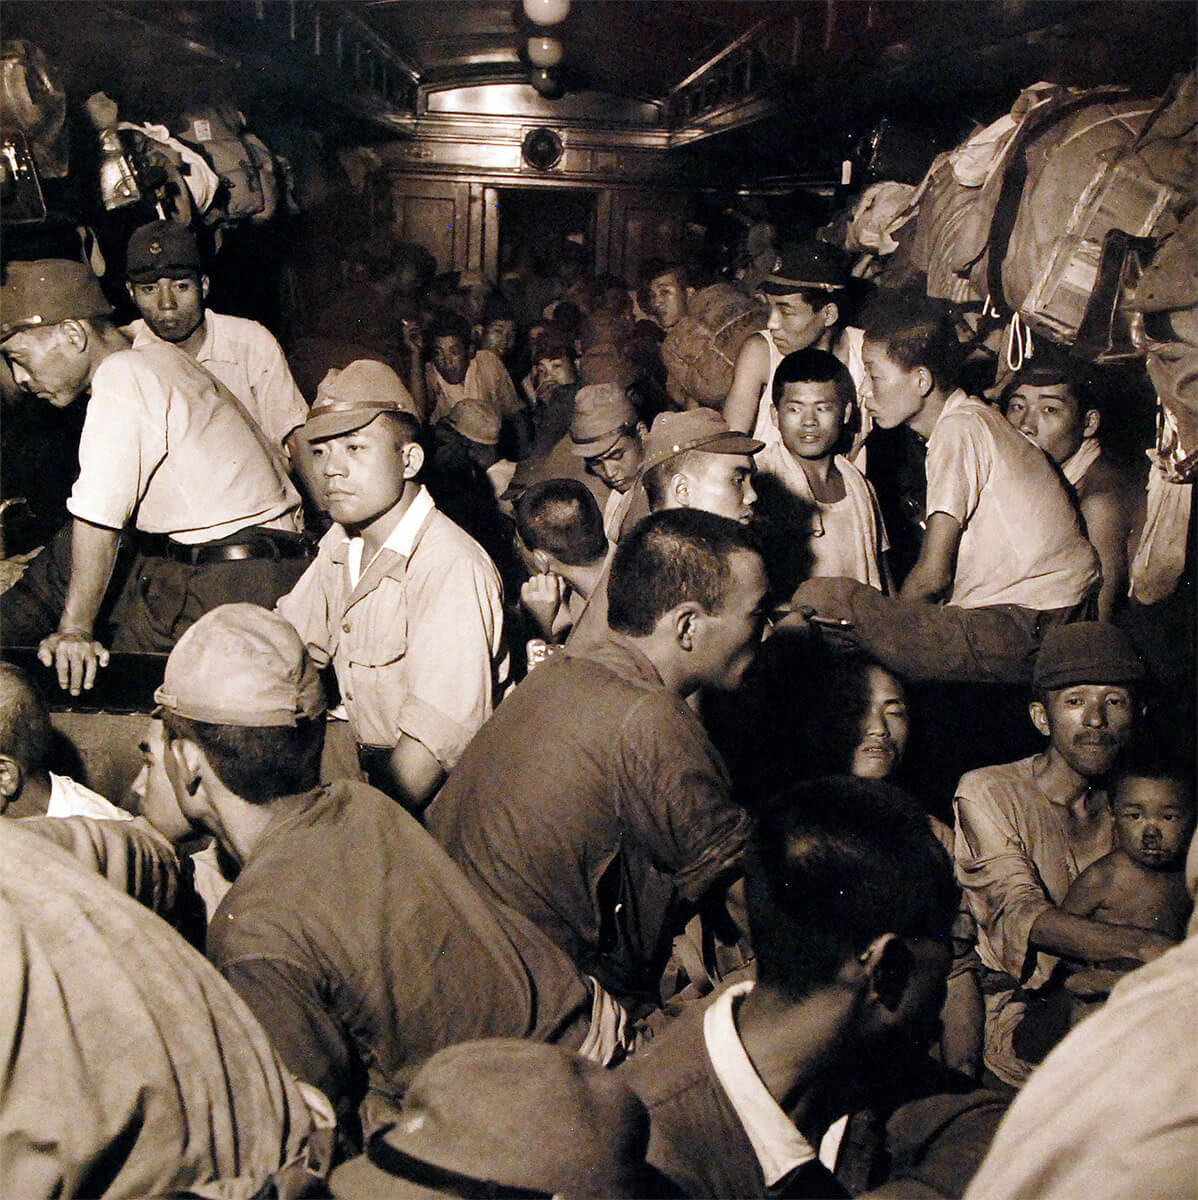 Demobilized Japanese soldiers and civilians aboard a train in Hiroshima, Japan, Sep 1945,  National Museum of the United States Navy<p>© Wayne Miller</p>